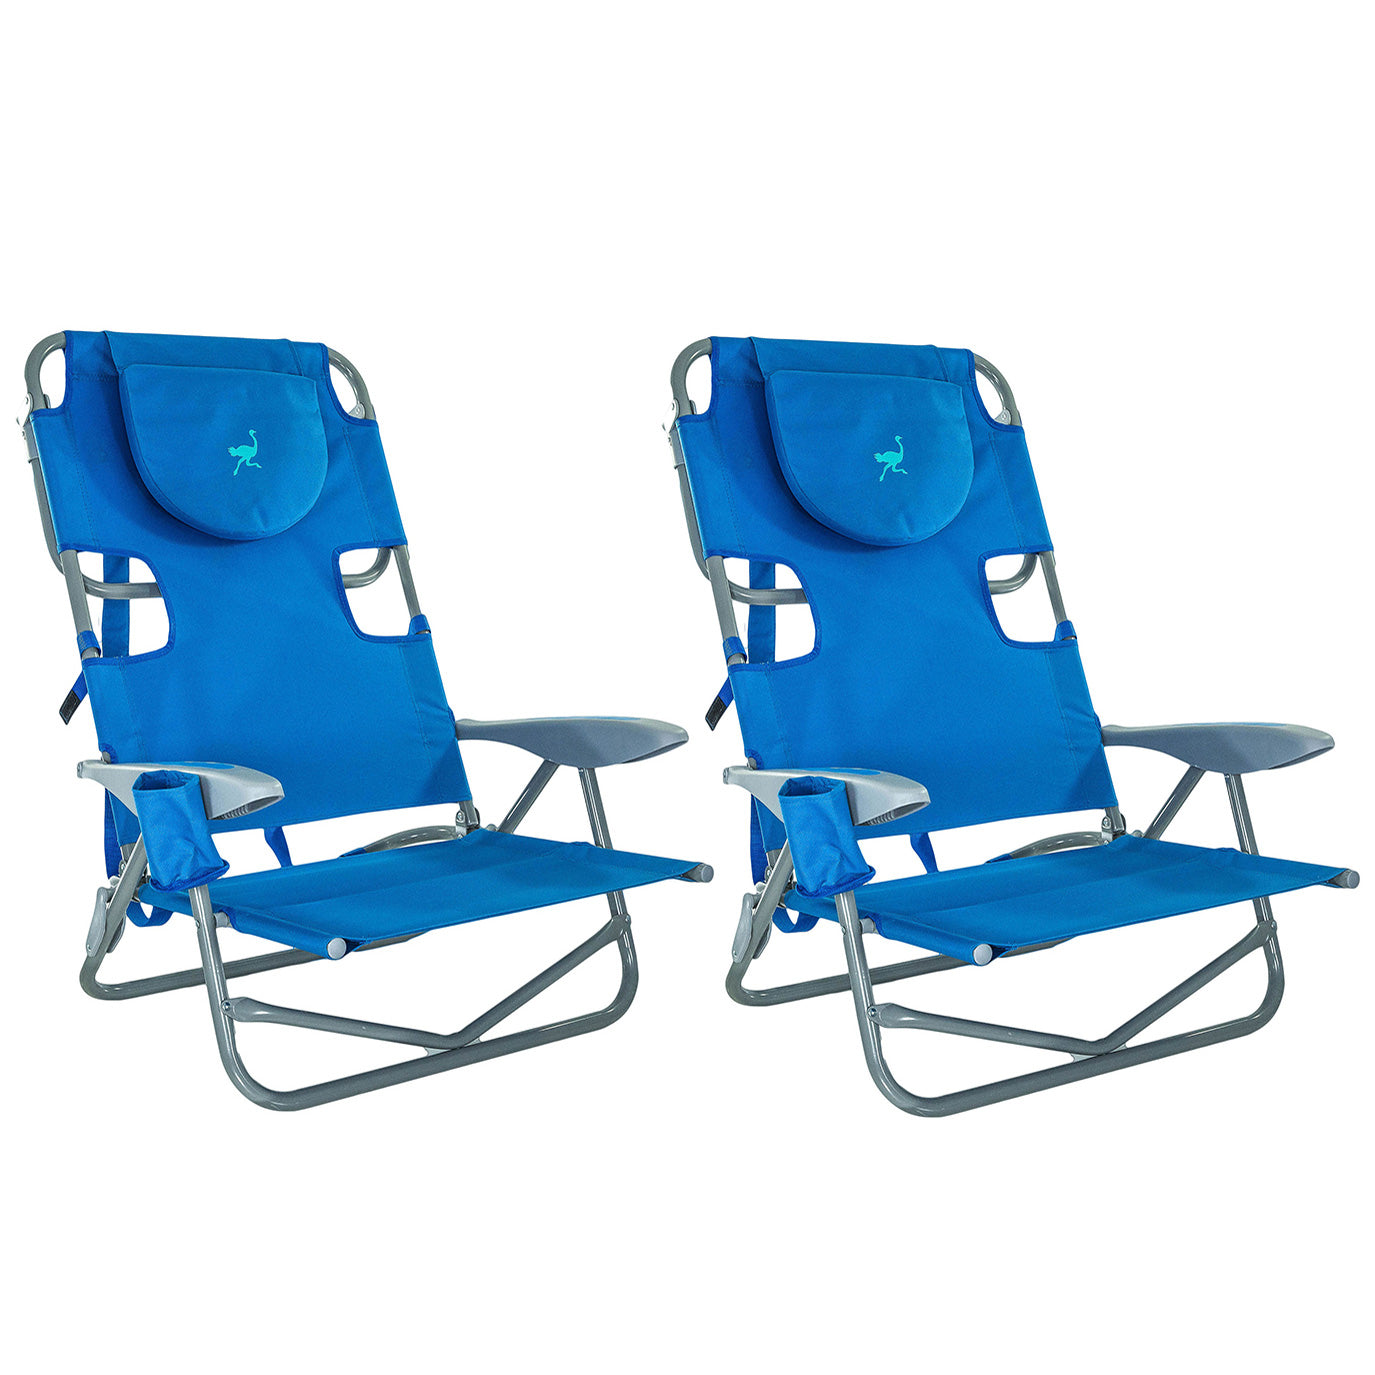 Ostrich-On-Your-Back-Outdoor-Lounge-5-Position-Reclining-Beach-Chair-(2-Pack)-Chairs-&-Seating